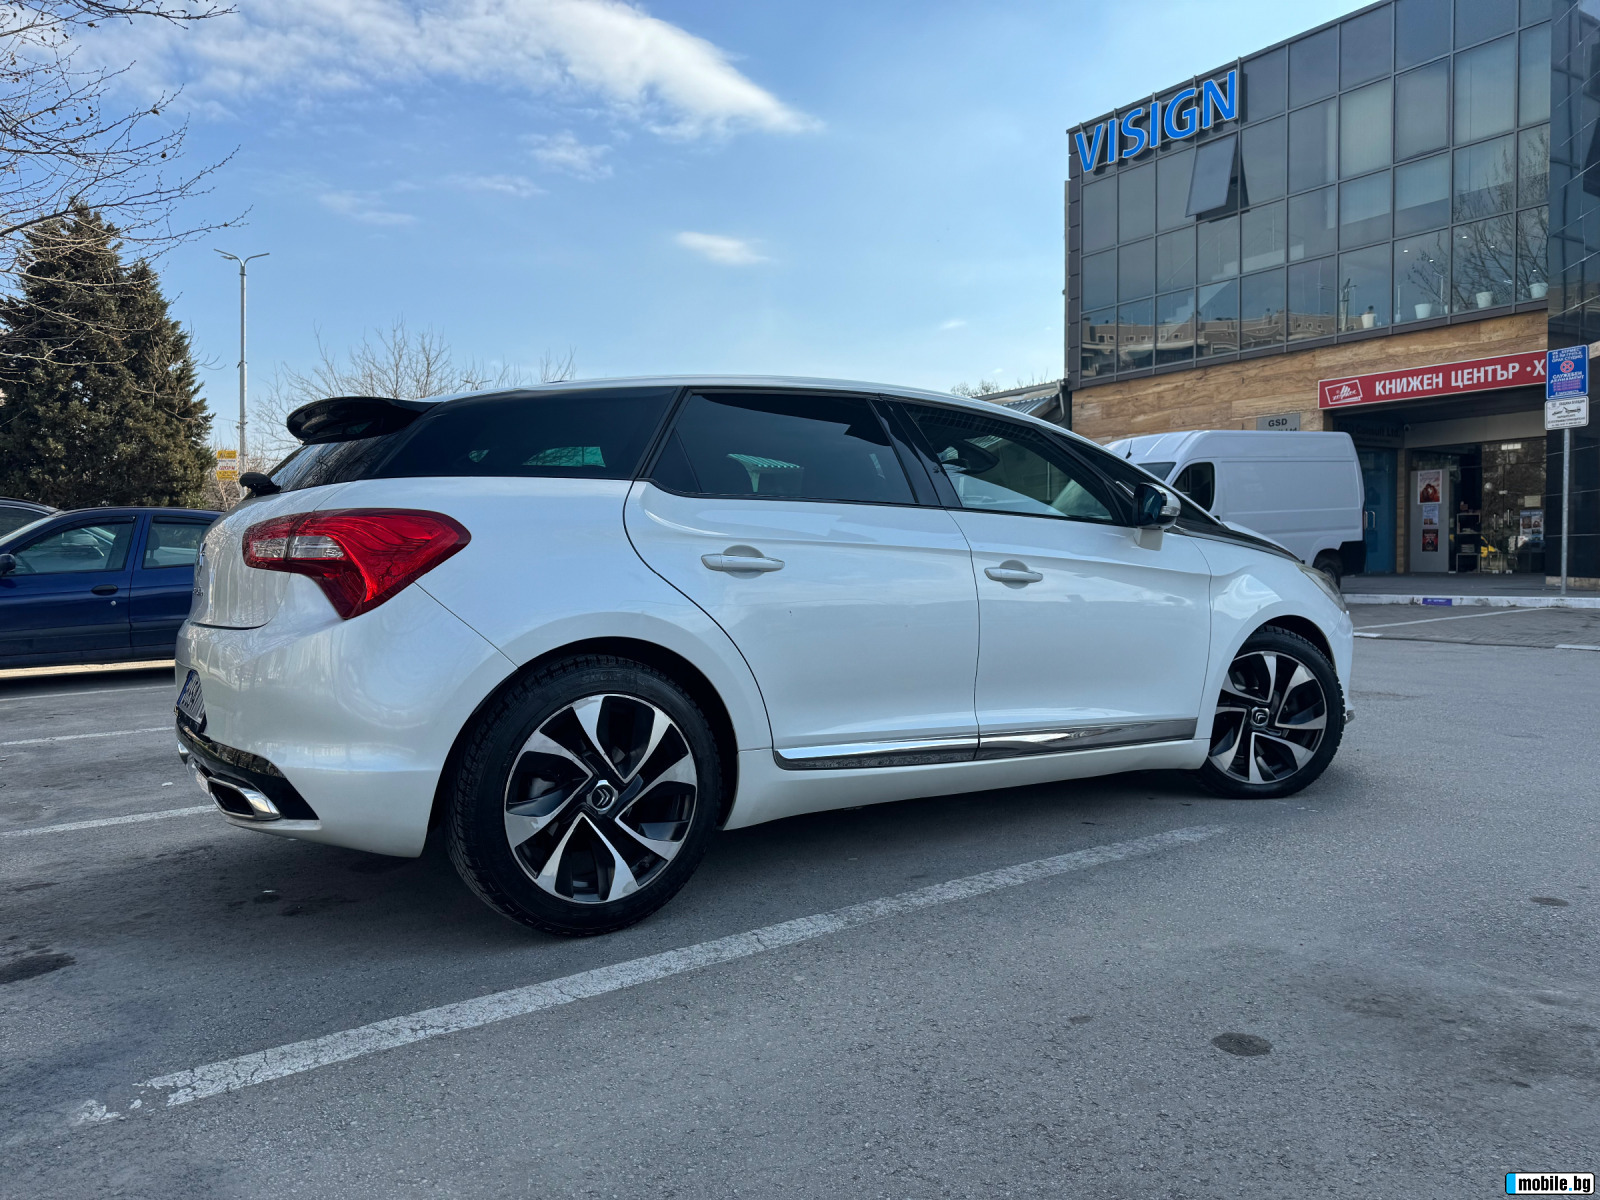 Citroen DS5 2.0 HDI EXCLUSIVE 163 PS | Mobile.bg   4